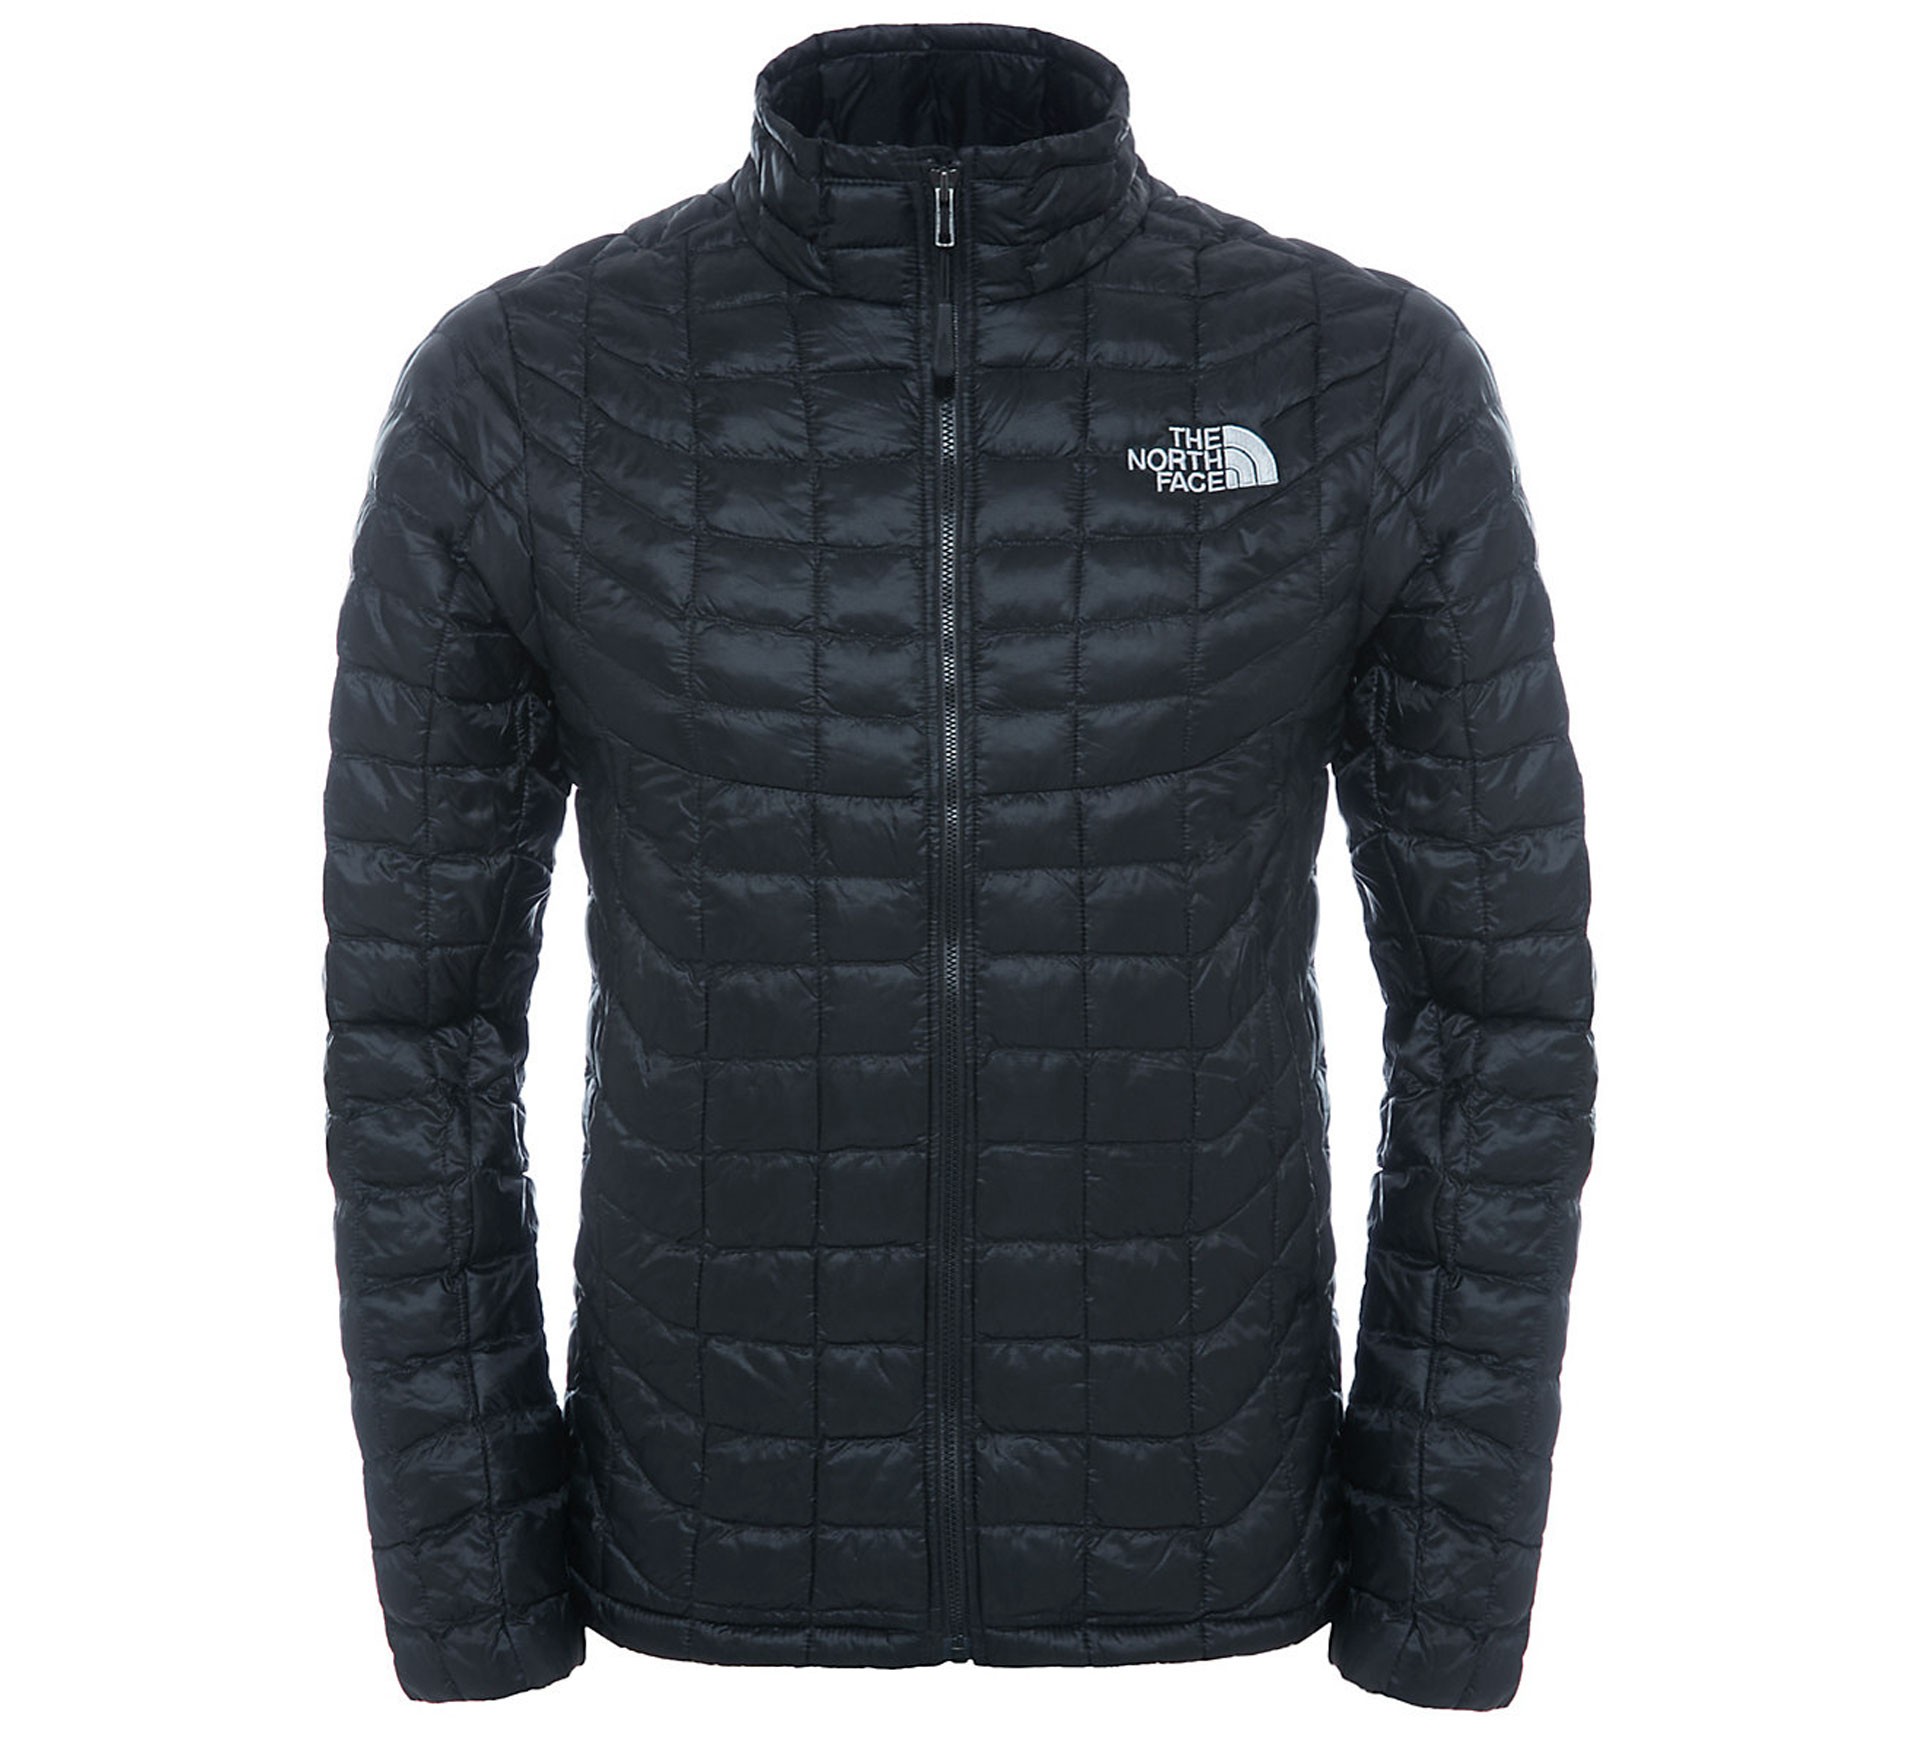 Plutosport - The North Face Thermoball FZ Jacket